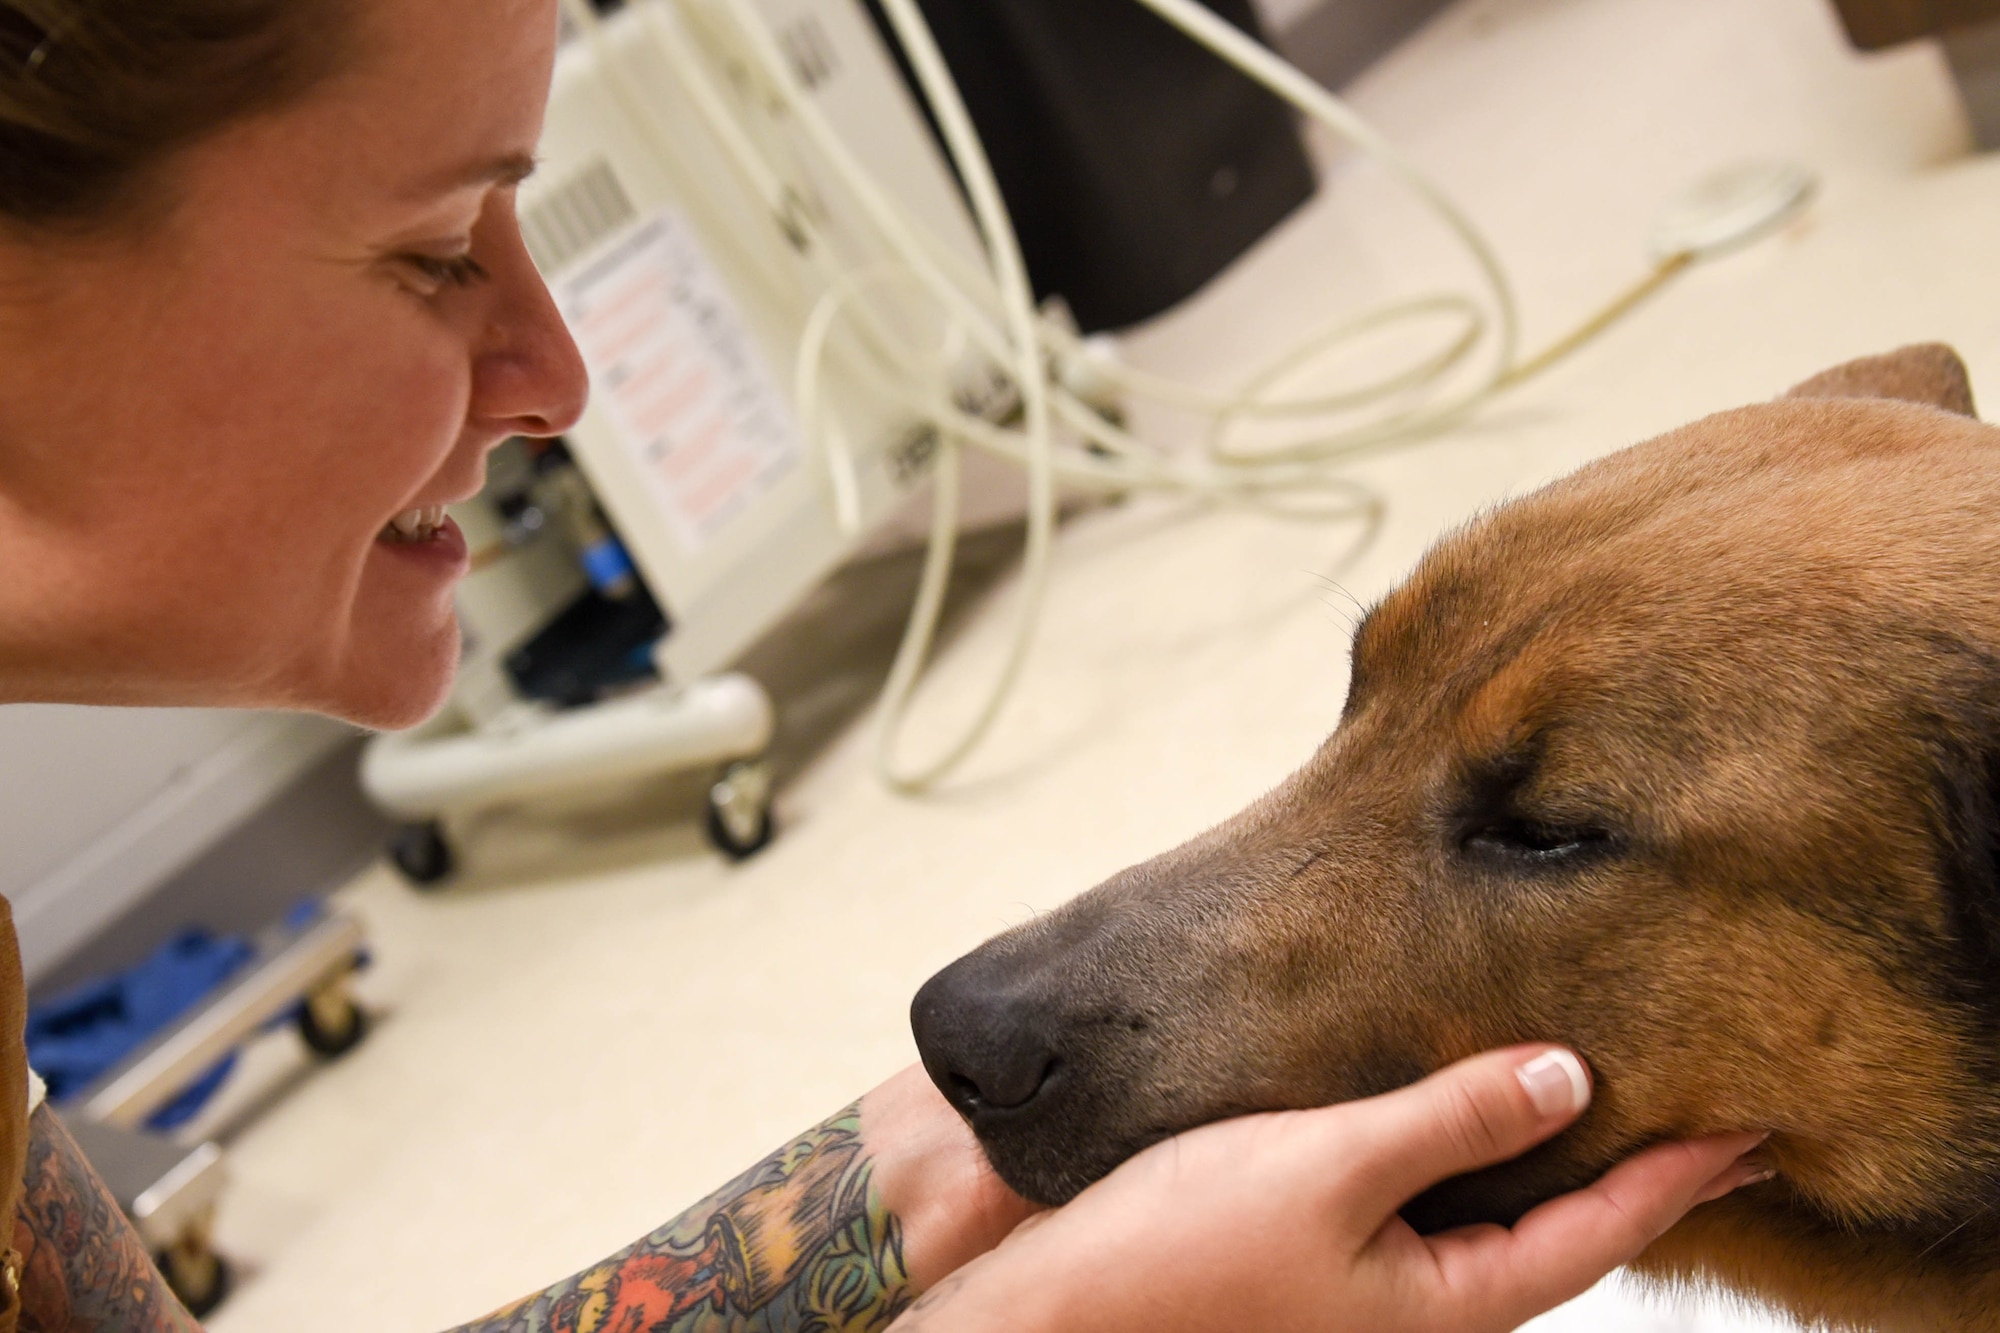 Staff Sgt. Samantha Champion, a 28th Security Forces Squadron military working dog handler, gives MWD Lezer a greeting as he starts waking up after his procedure at the veterinary clinic on Ellsworth Air Force Base, S.D., Dec. 4, 2018. The handlers have very close bonds with their animals, which helps them work to their fullest potential.  (U.S. Air Force photo by Airman John Ennis)